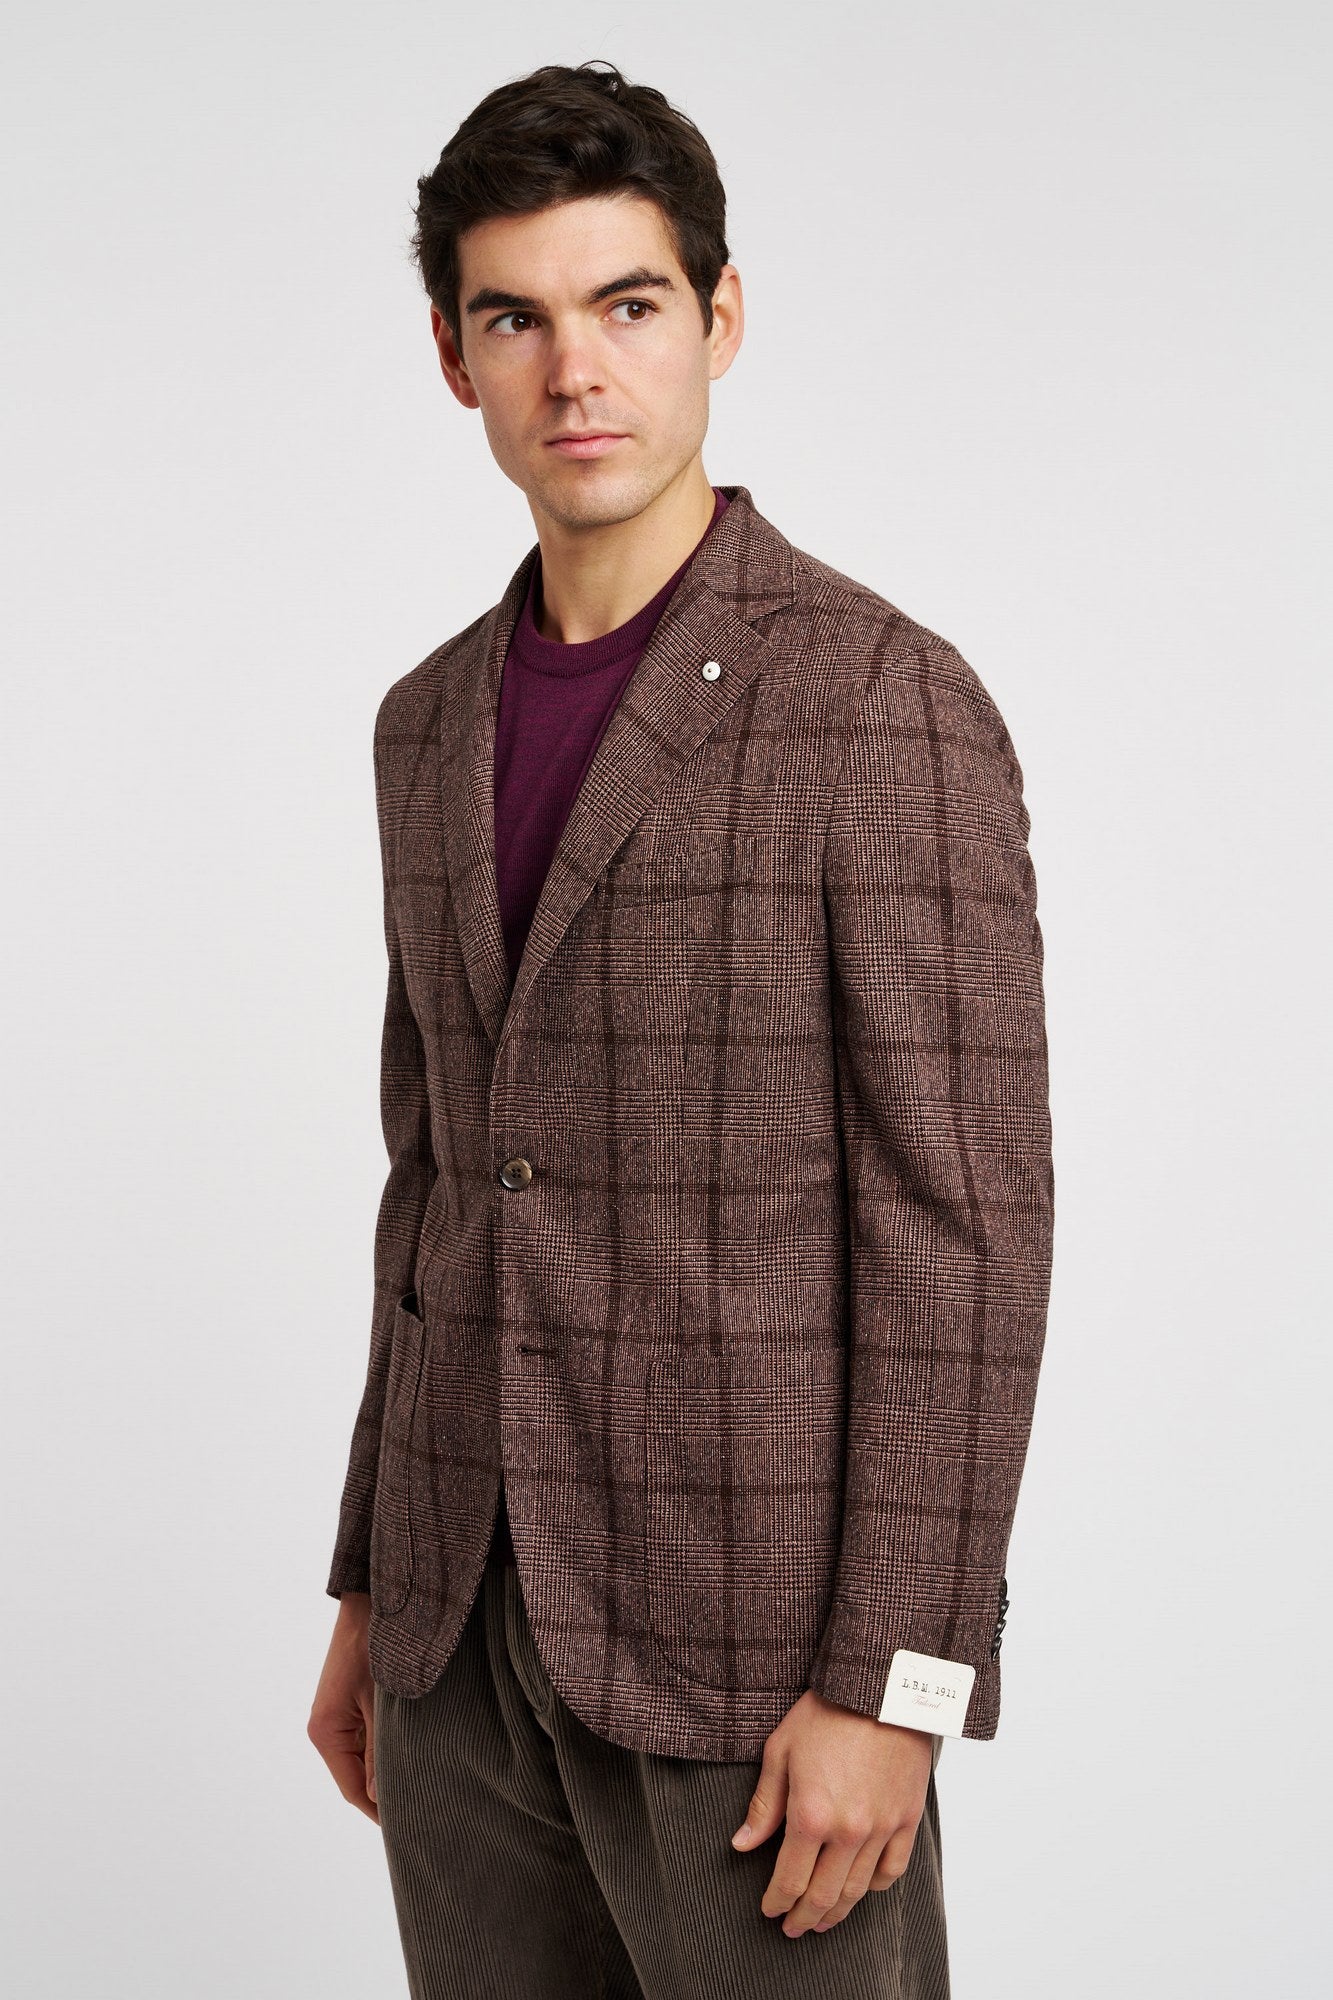 L.B.M. 1911 Single-Breasted Mixed Wool/Cotton/Silk Brown Houndstooth Jacket-3